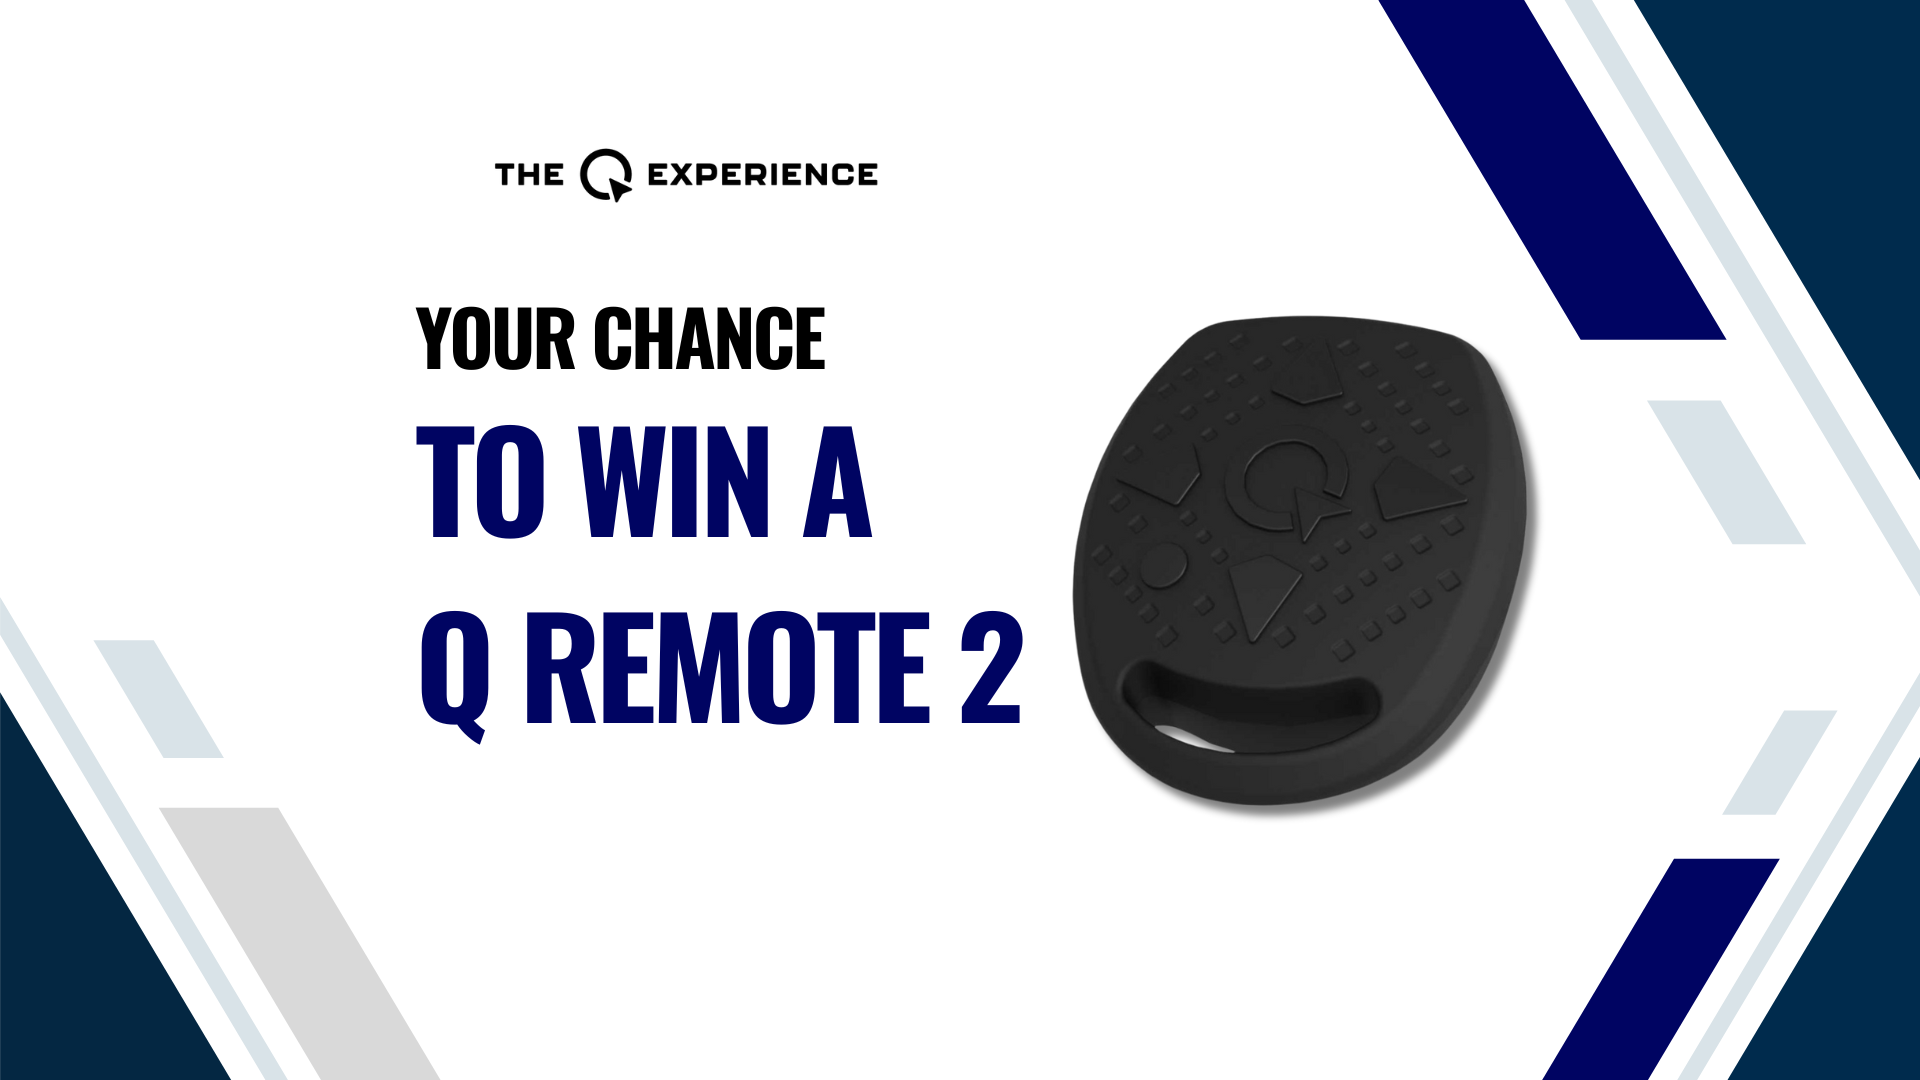 Fill out a survey and win a Q Remote 2!